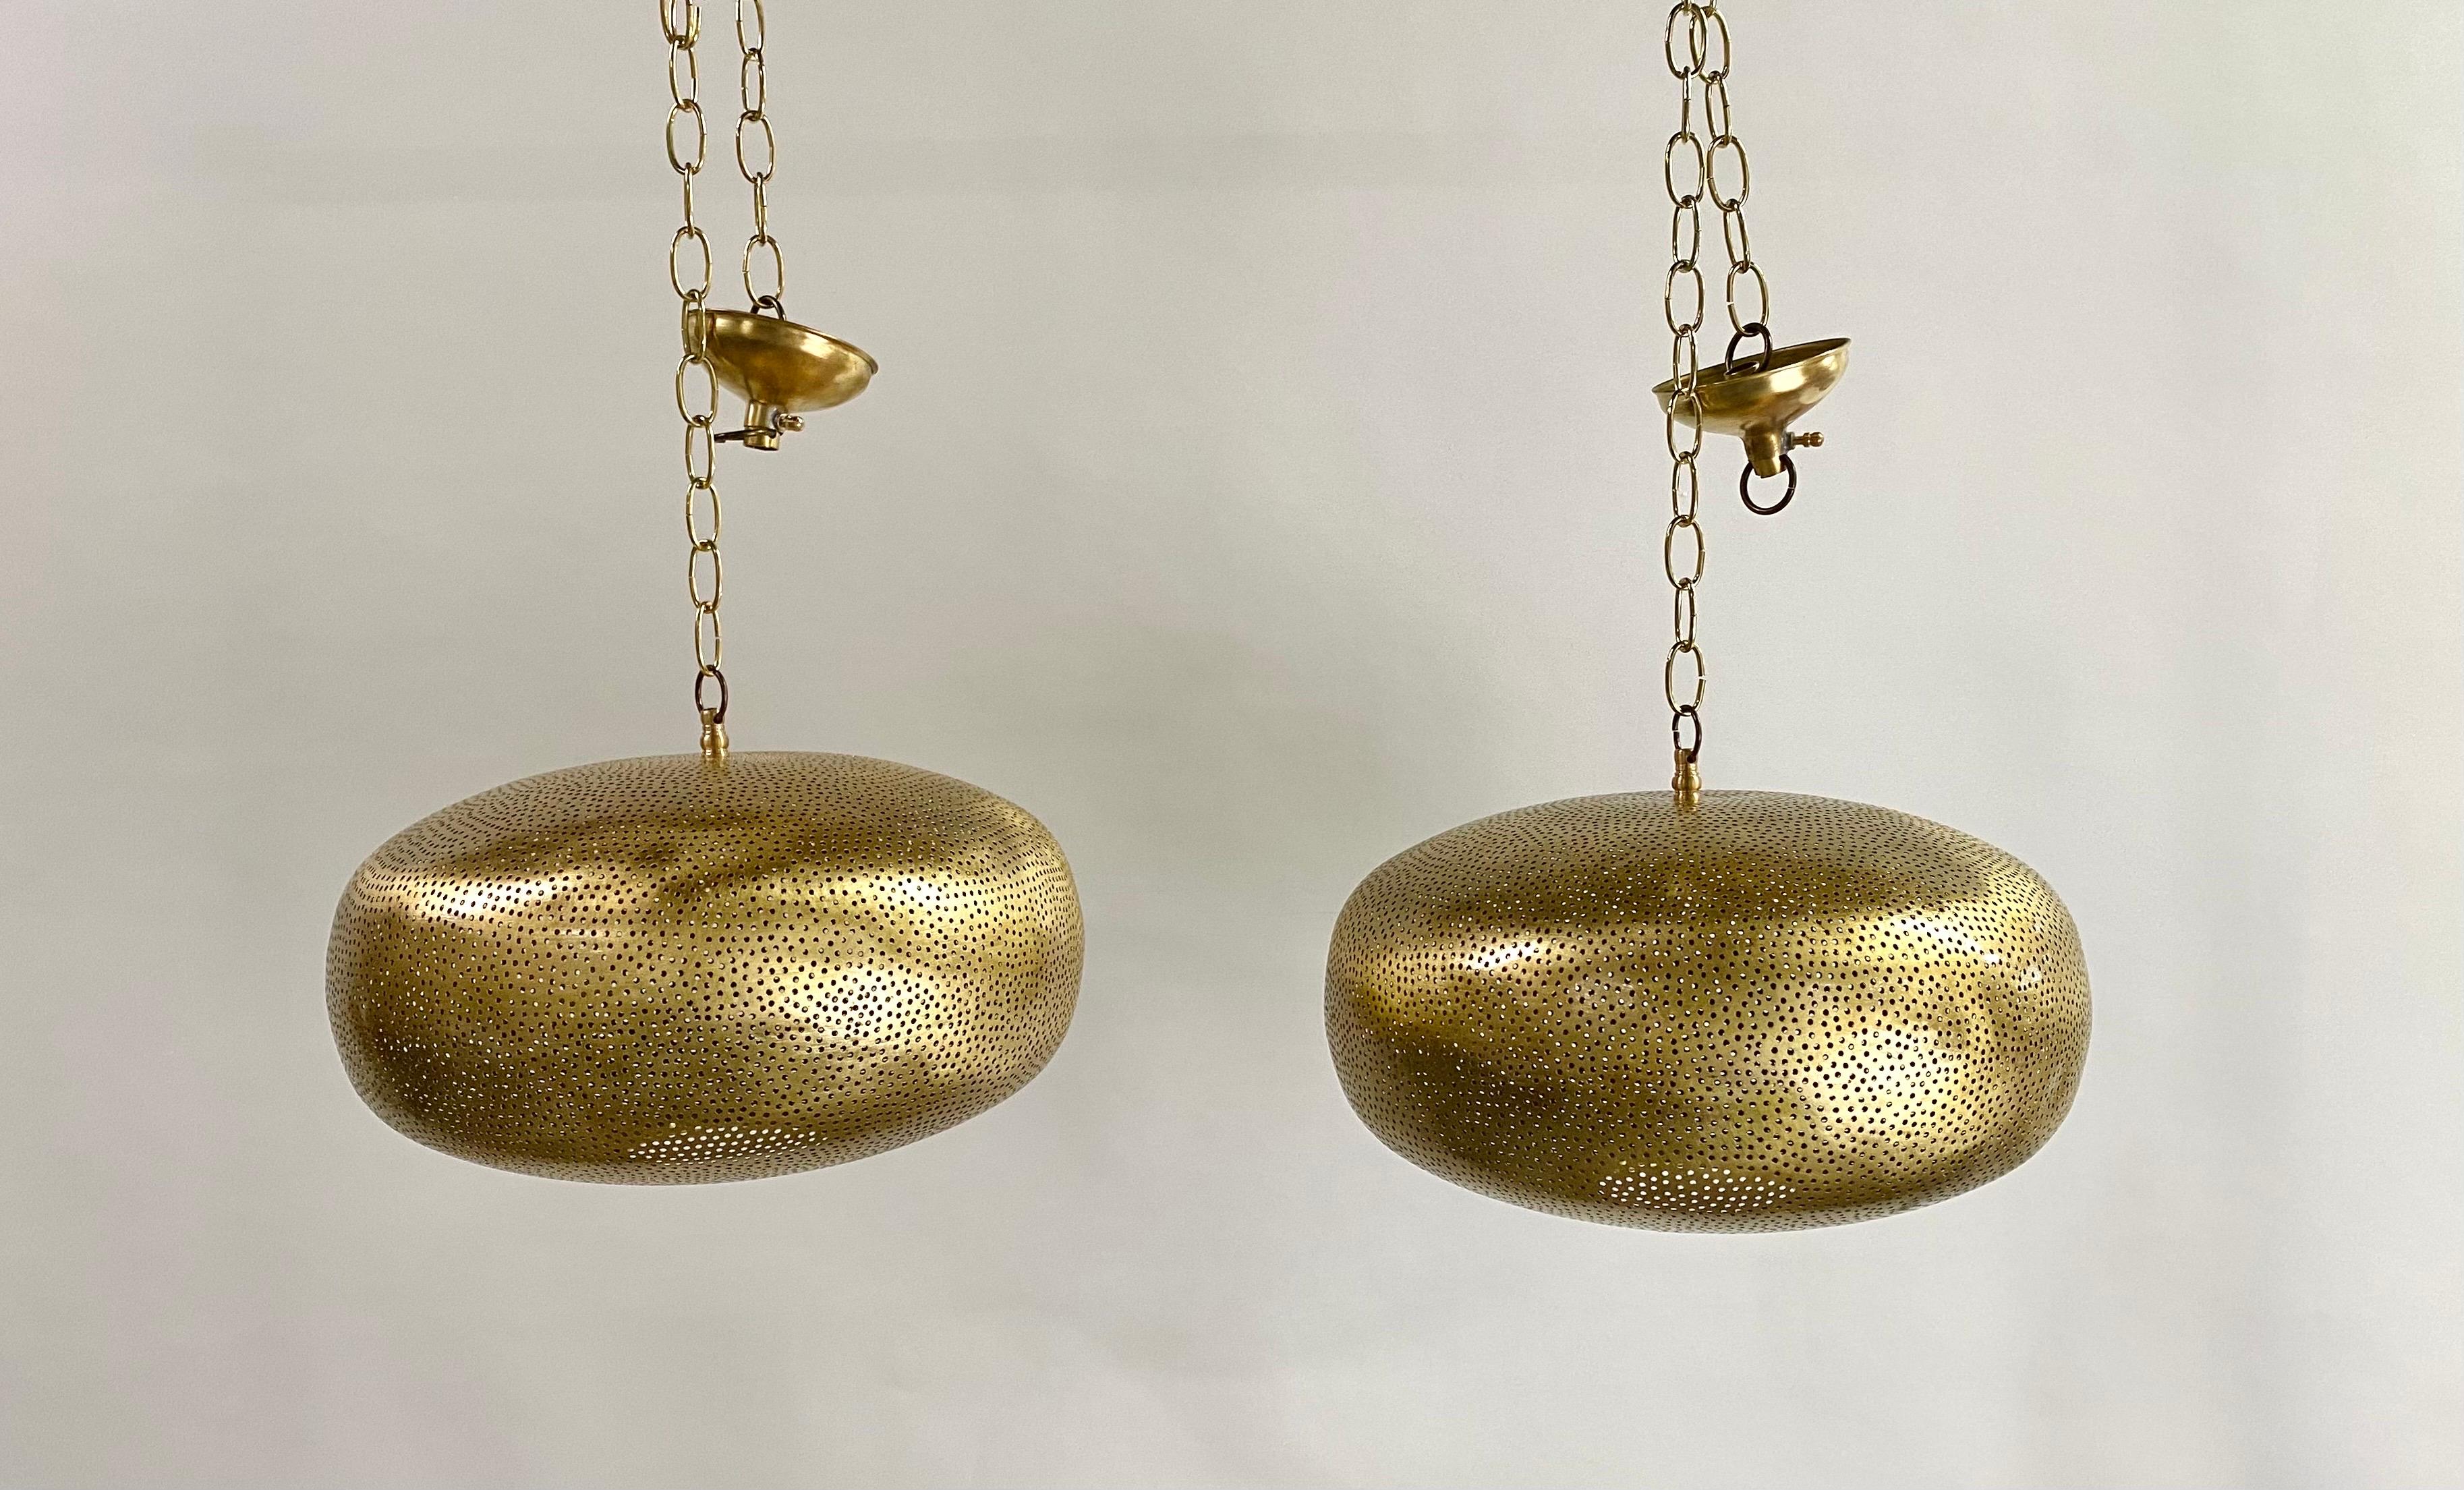 A pair of boho chic brass pendant or chandelier. These beautiful artisan-crafted pendants will add a note of exotic distinction to any room. Featuring hand-tooled brass and further enhanced with an oval retro shape, these pendants or lanterns